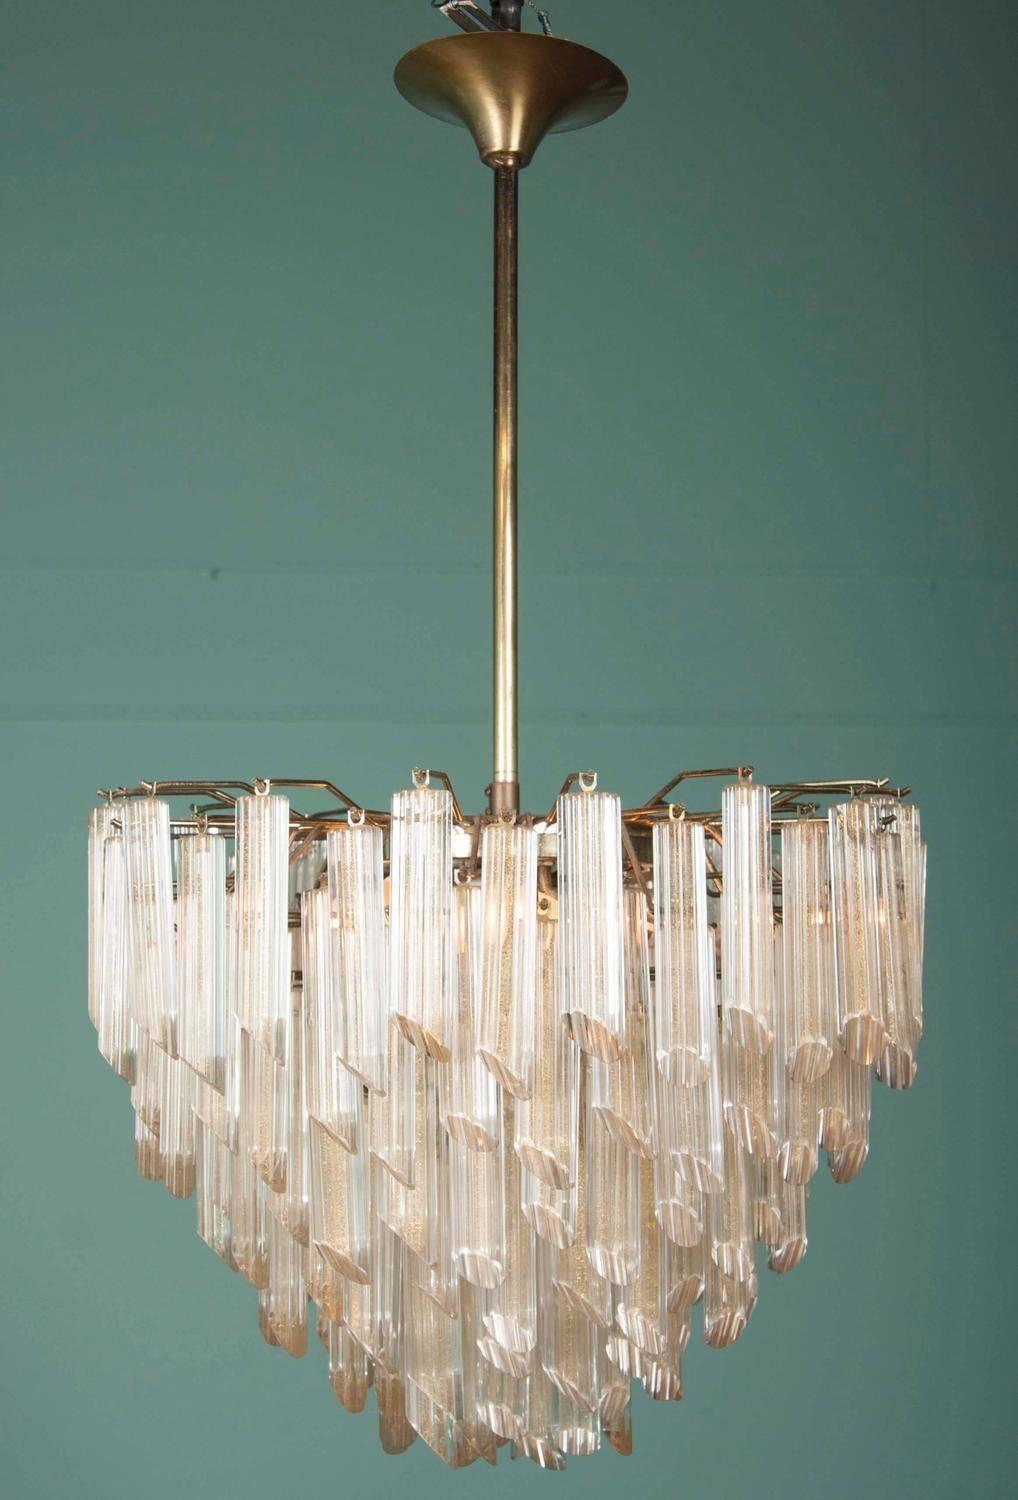 A magnificent Italian Mid-Century Modern chandelier of tiered Murano glass prisms with gold inclusions by the Camer Glass Company from the 1970s.

Dimensions: 36